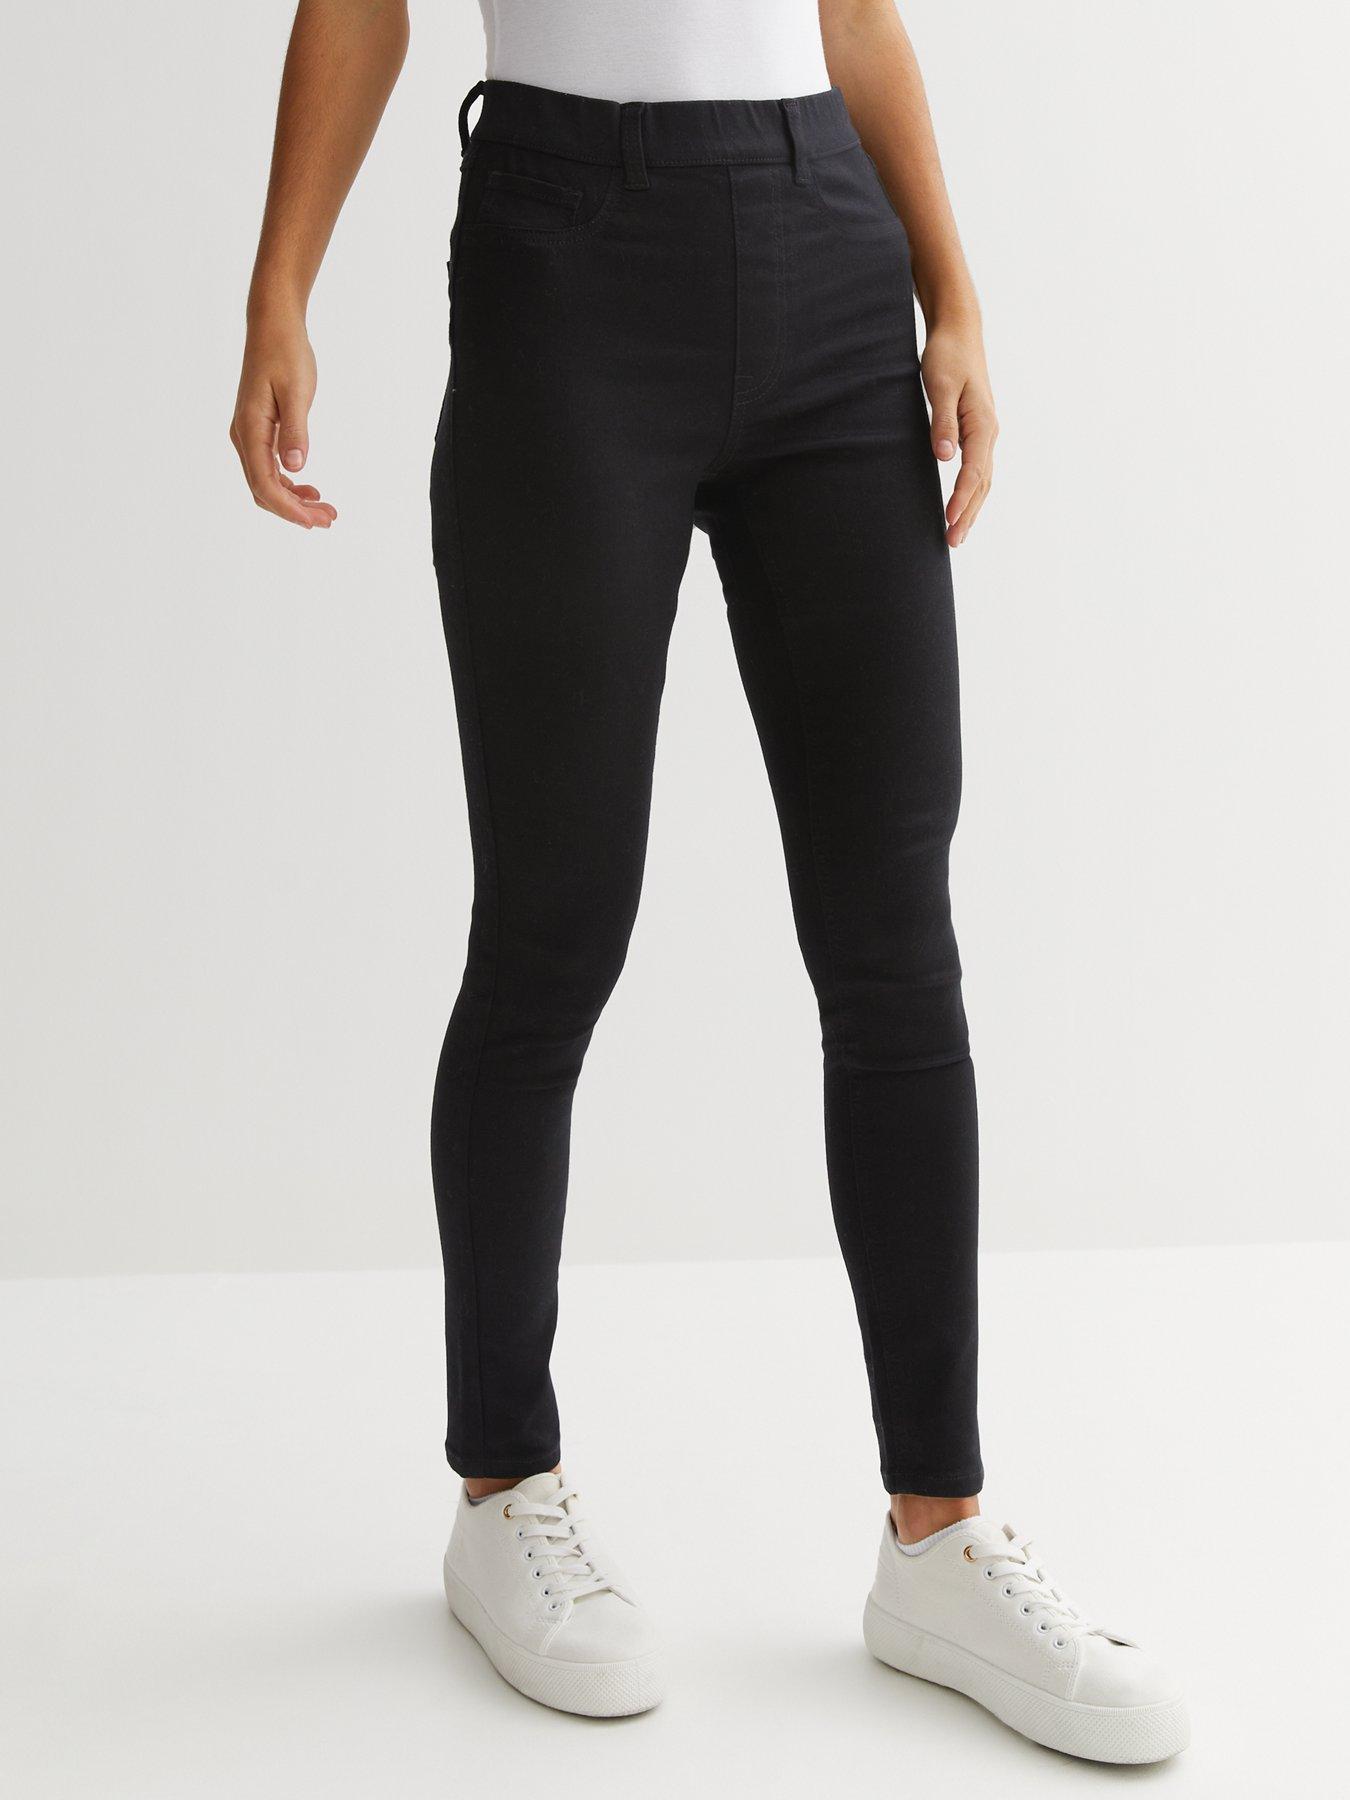 New Look coated lift & shape jeggings in black